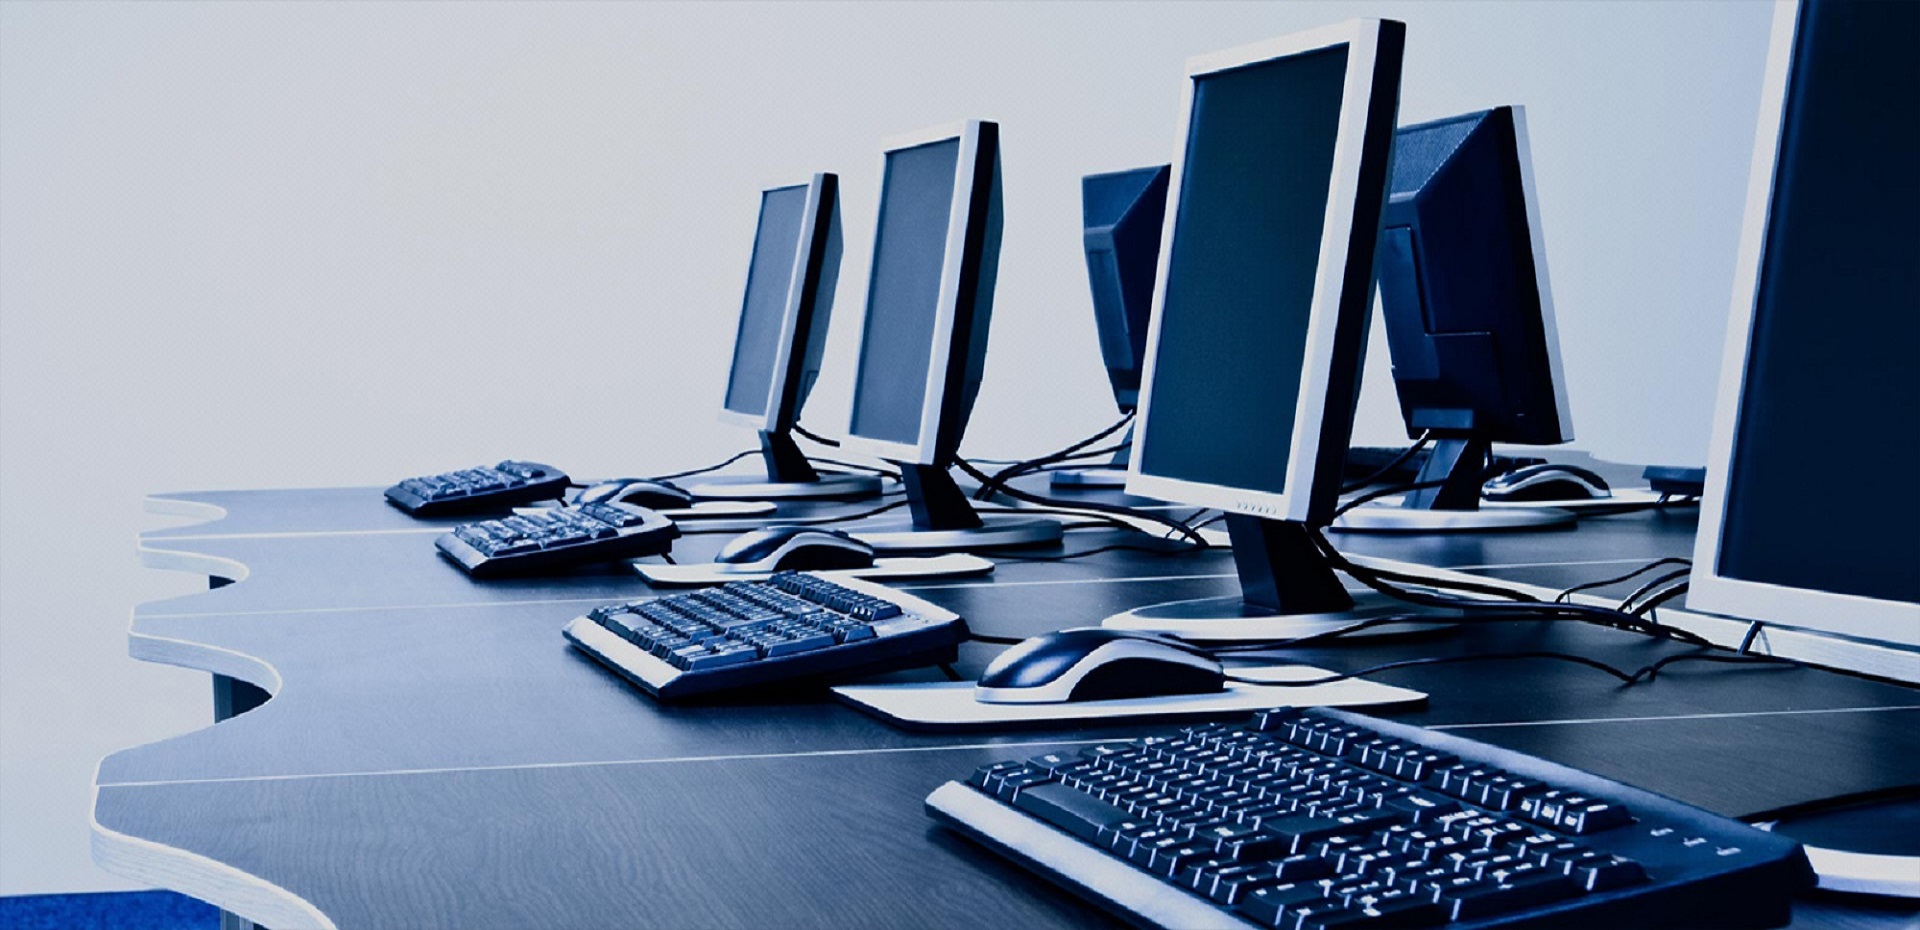 Efficient Managed IT Services: Four Modern Desktop Setups with Keyboards and Mice on Table